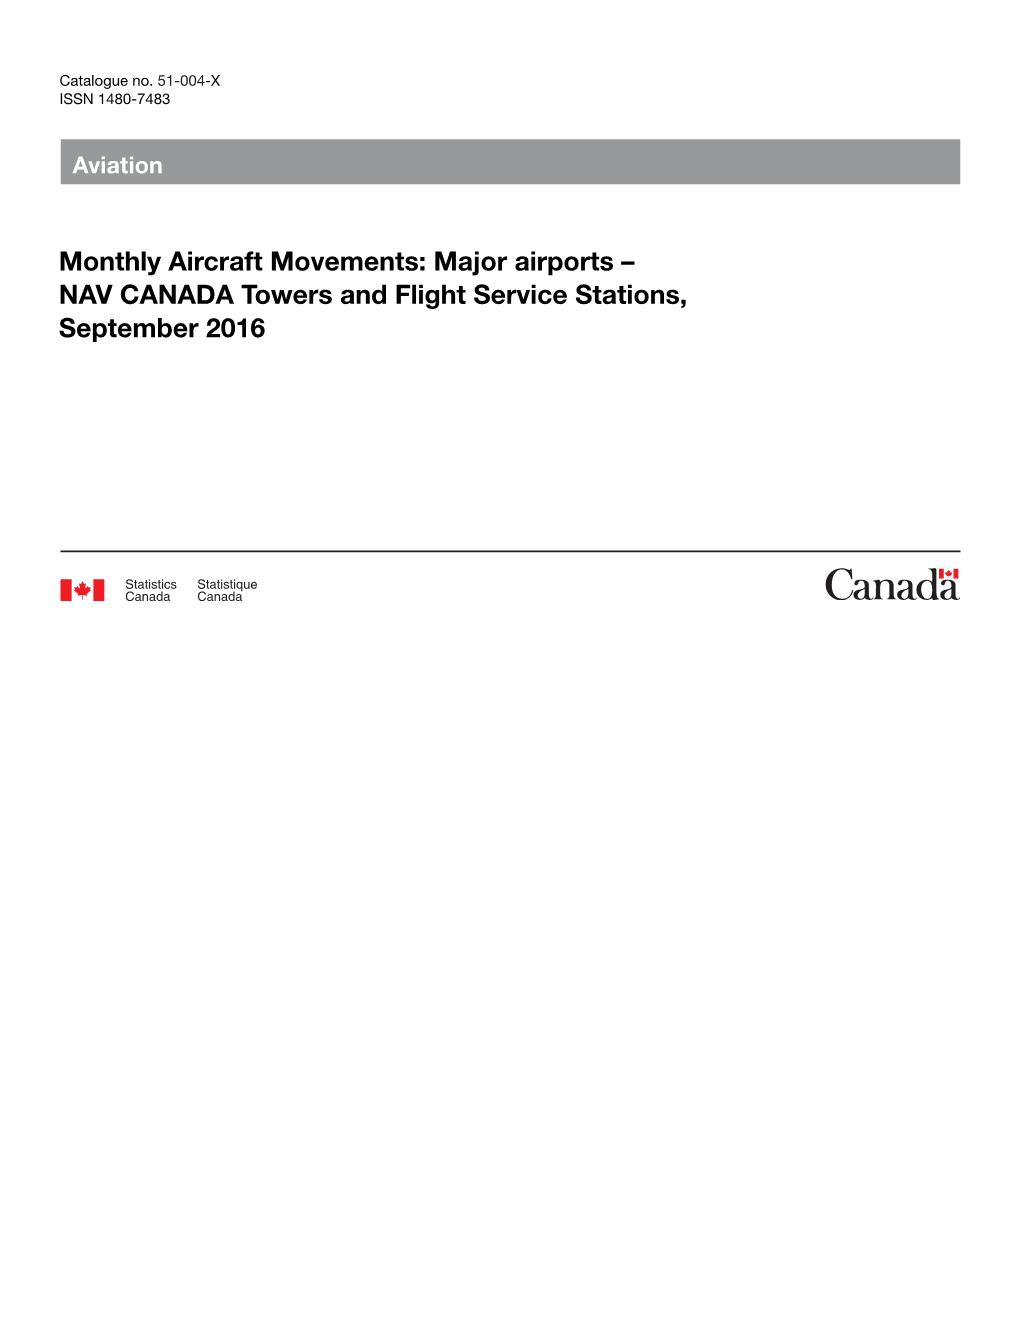 Monthly Aircraft Movements: Major Airports – NAV CANADA Towers and Flight Service Stations, September 2016